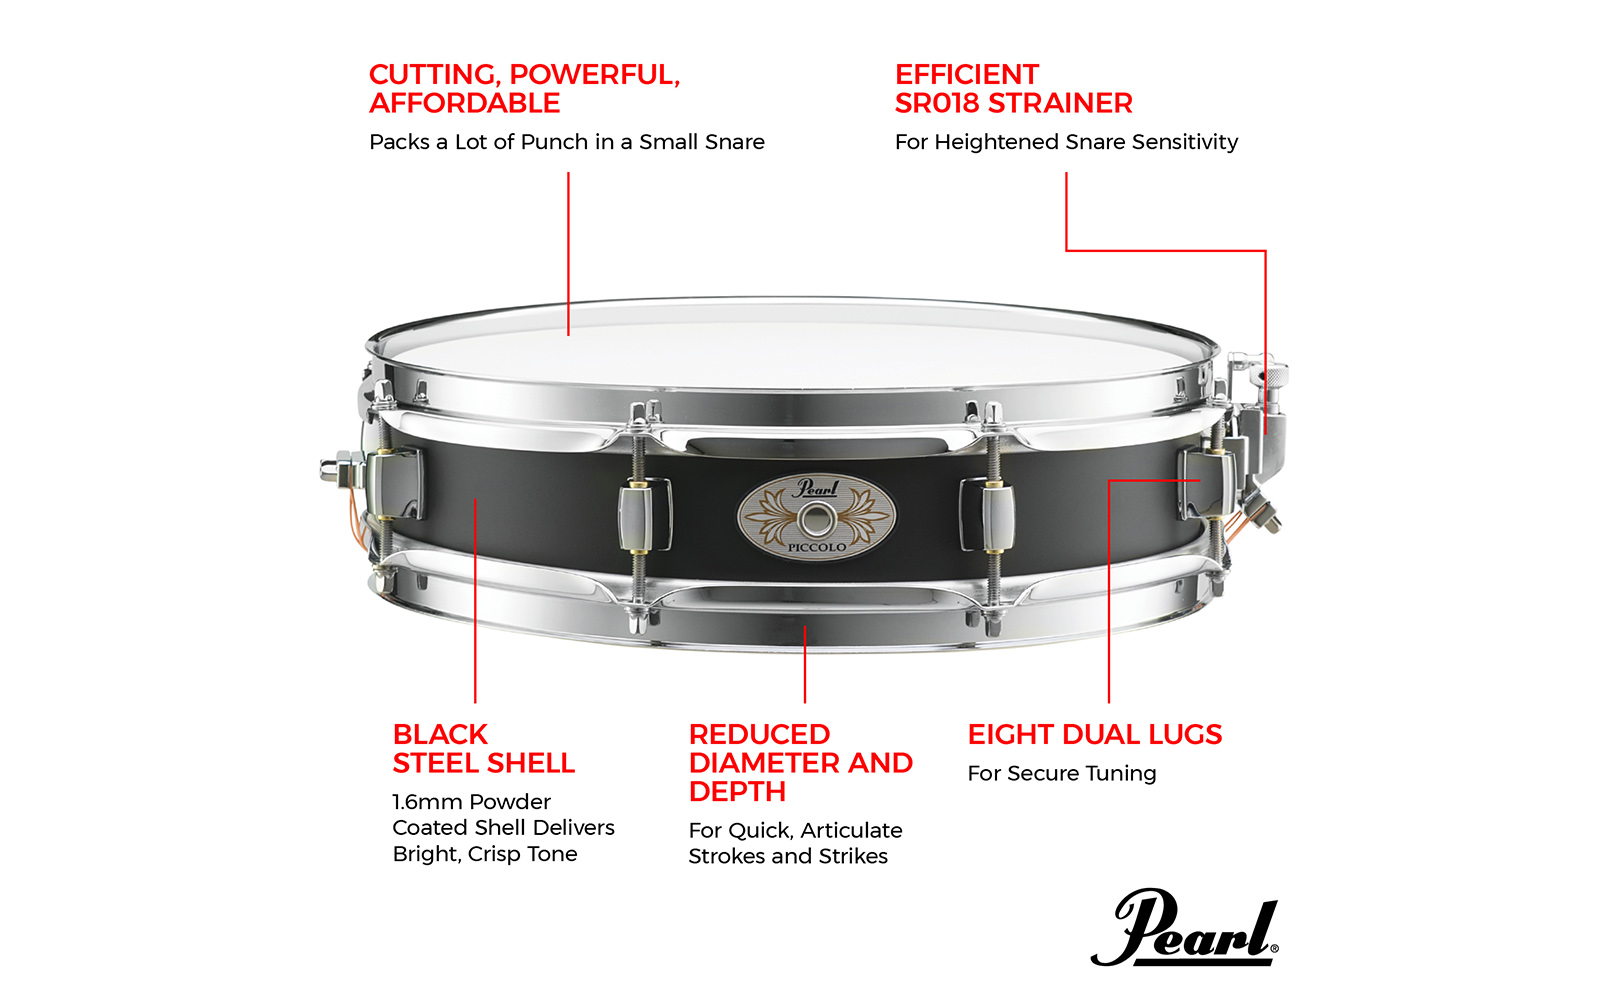 Pearl Snare - Steel or Brass?